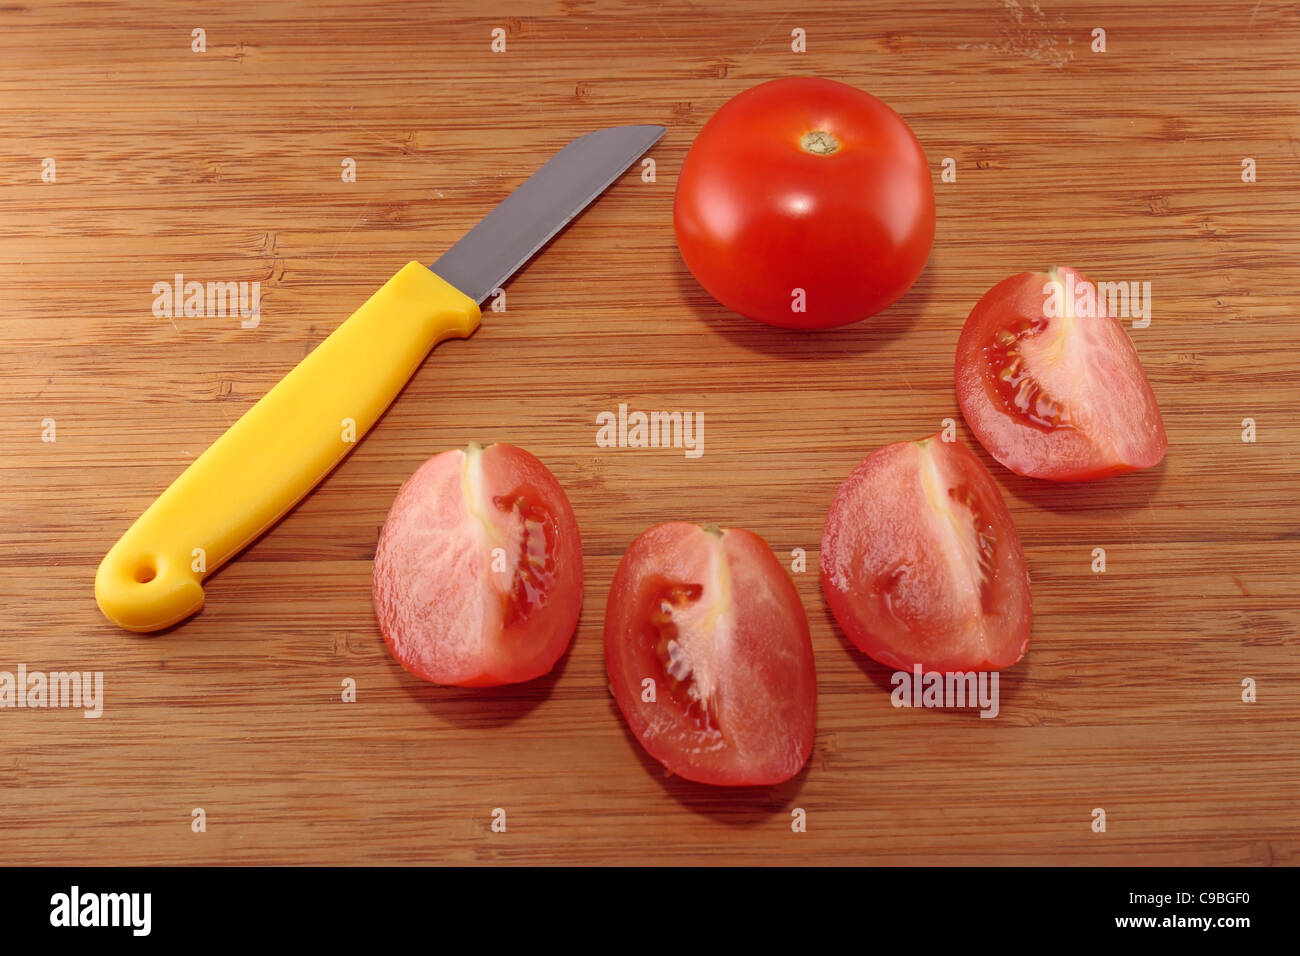 Tomato and four tomato quarters on a chopping board Stock Photo